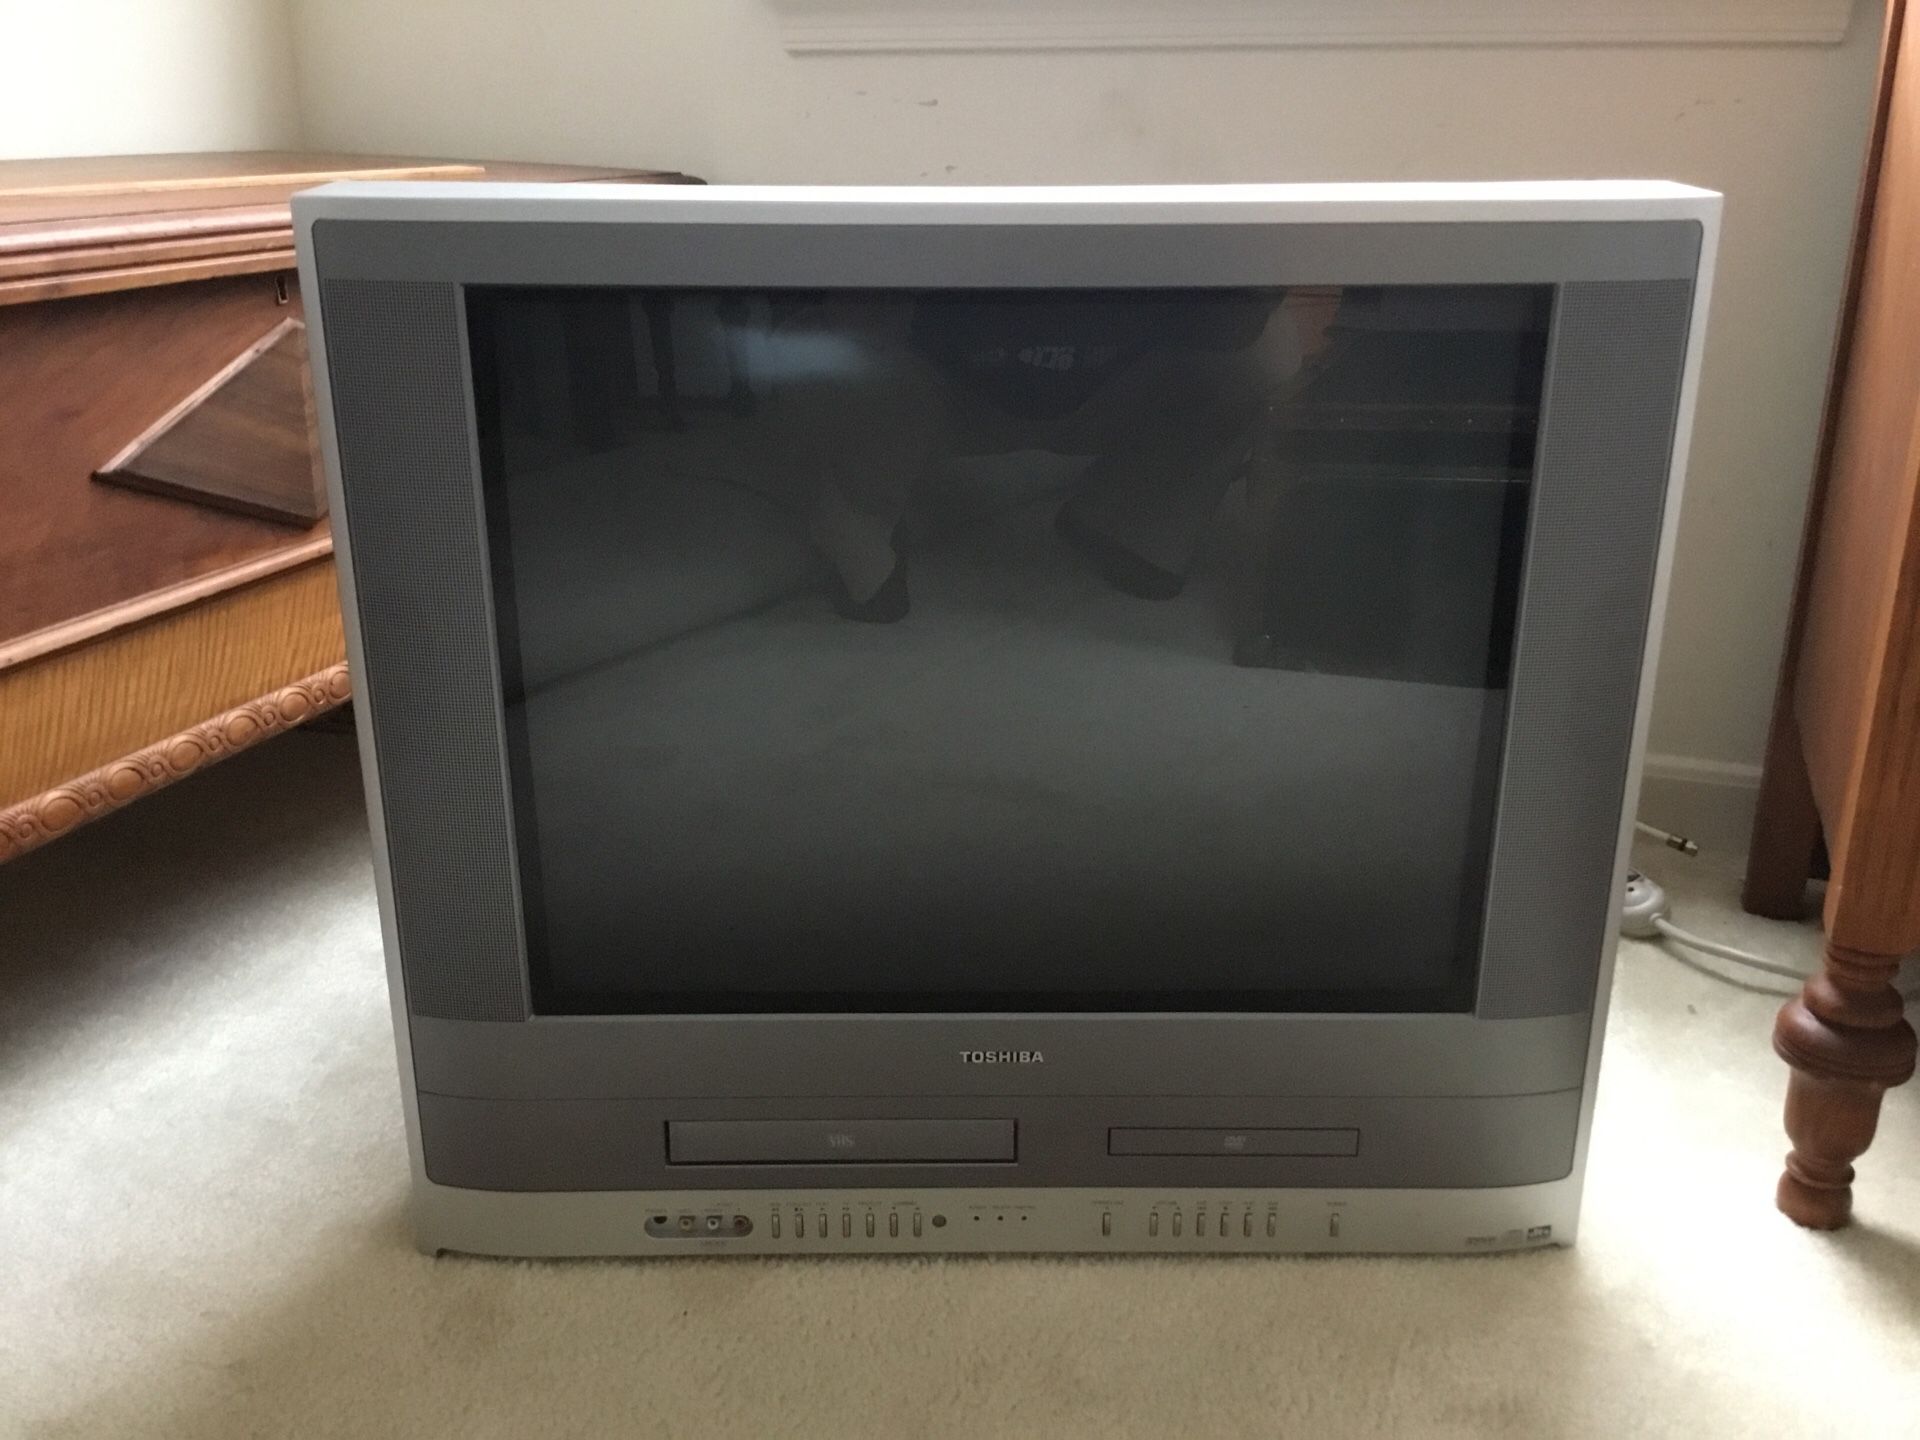 FREE Toshiba TV with built-in DVD and VCR players